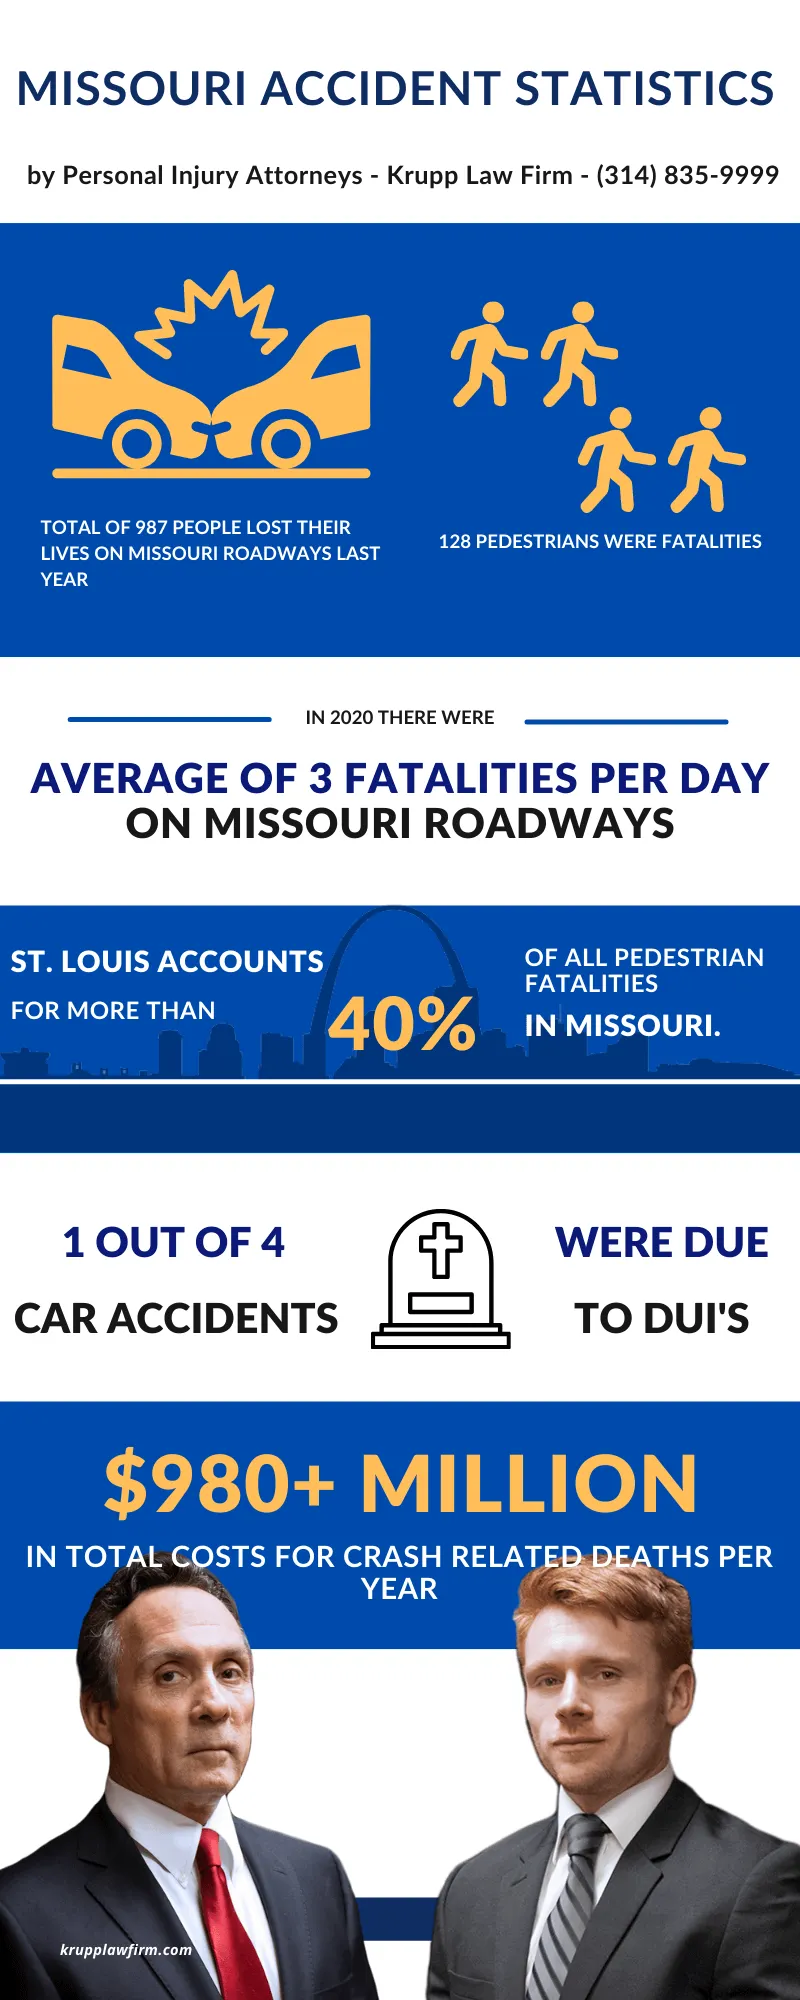 Missouri car accident statistics infographic by Krupp Law Firm